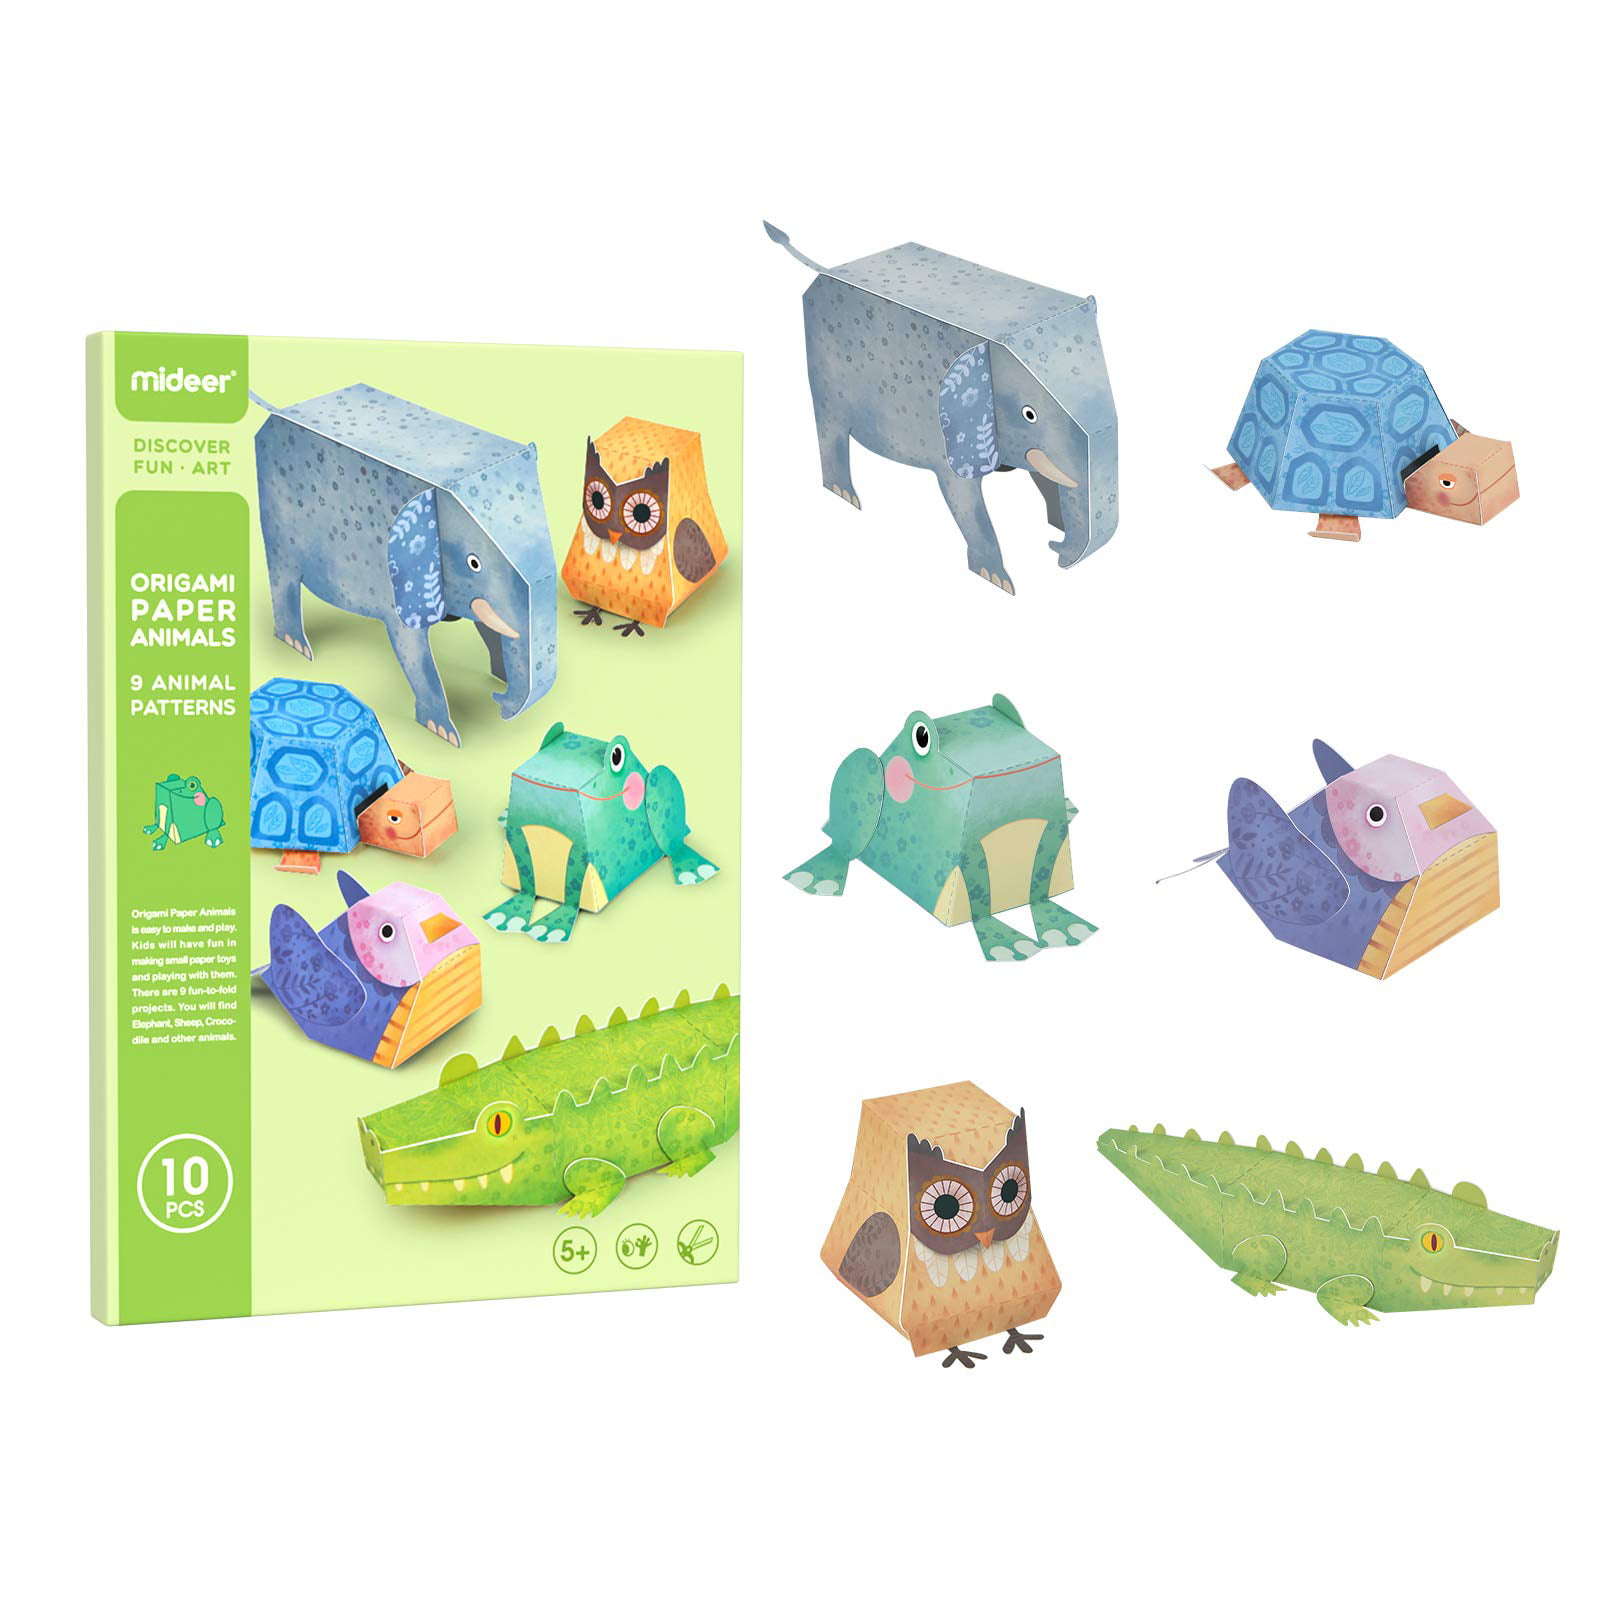 Mideer 10Pcs Origami Paper Animals for Kids Ages 5-6-7-8,Construction Paper  for Toddlers Arts and Crafts Kits,3D Paper Model Set,Elephant Lion  Butterfly Tortoise Frog Sheep Owl Bird Crocodile Diy Toys 